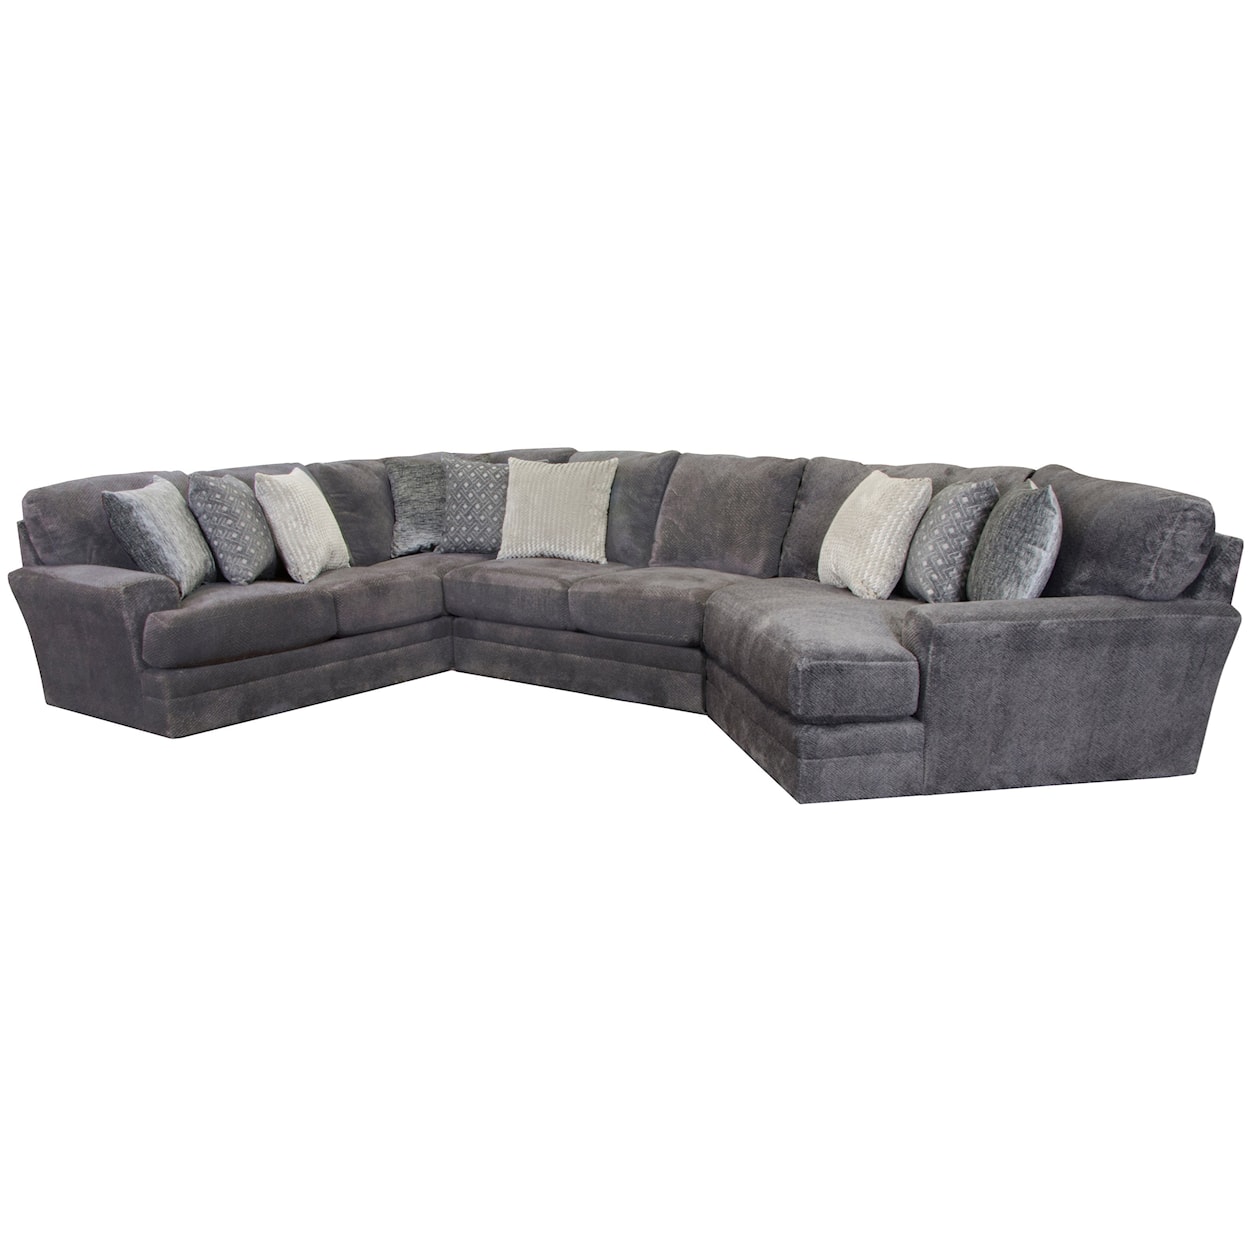 Carolina Furniture 4376 Mammoth 3-Piece Sectional with RSF Piano Wedge